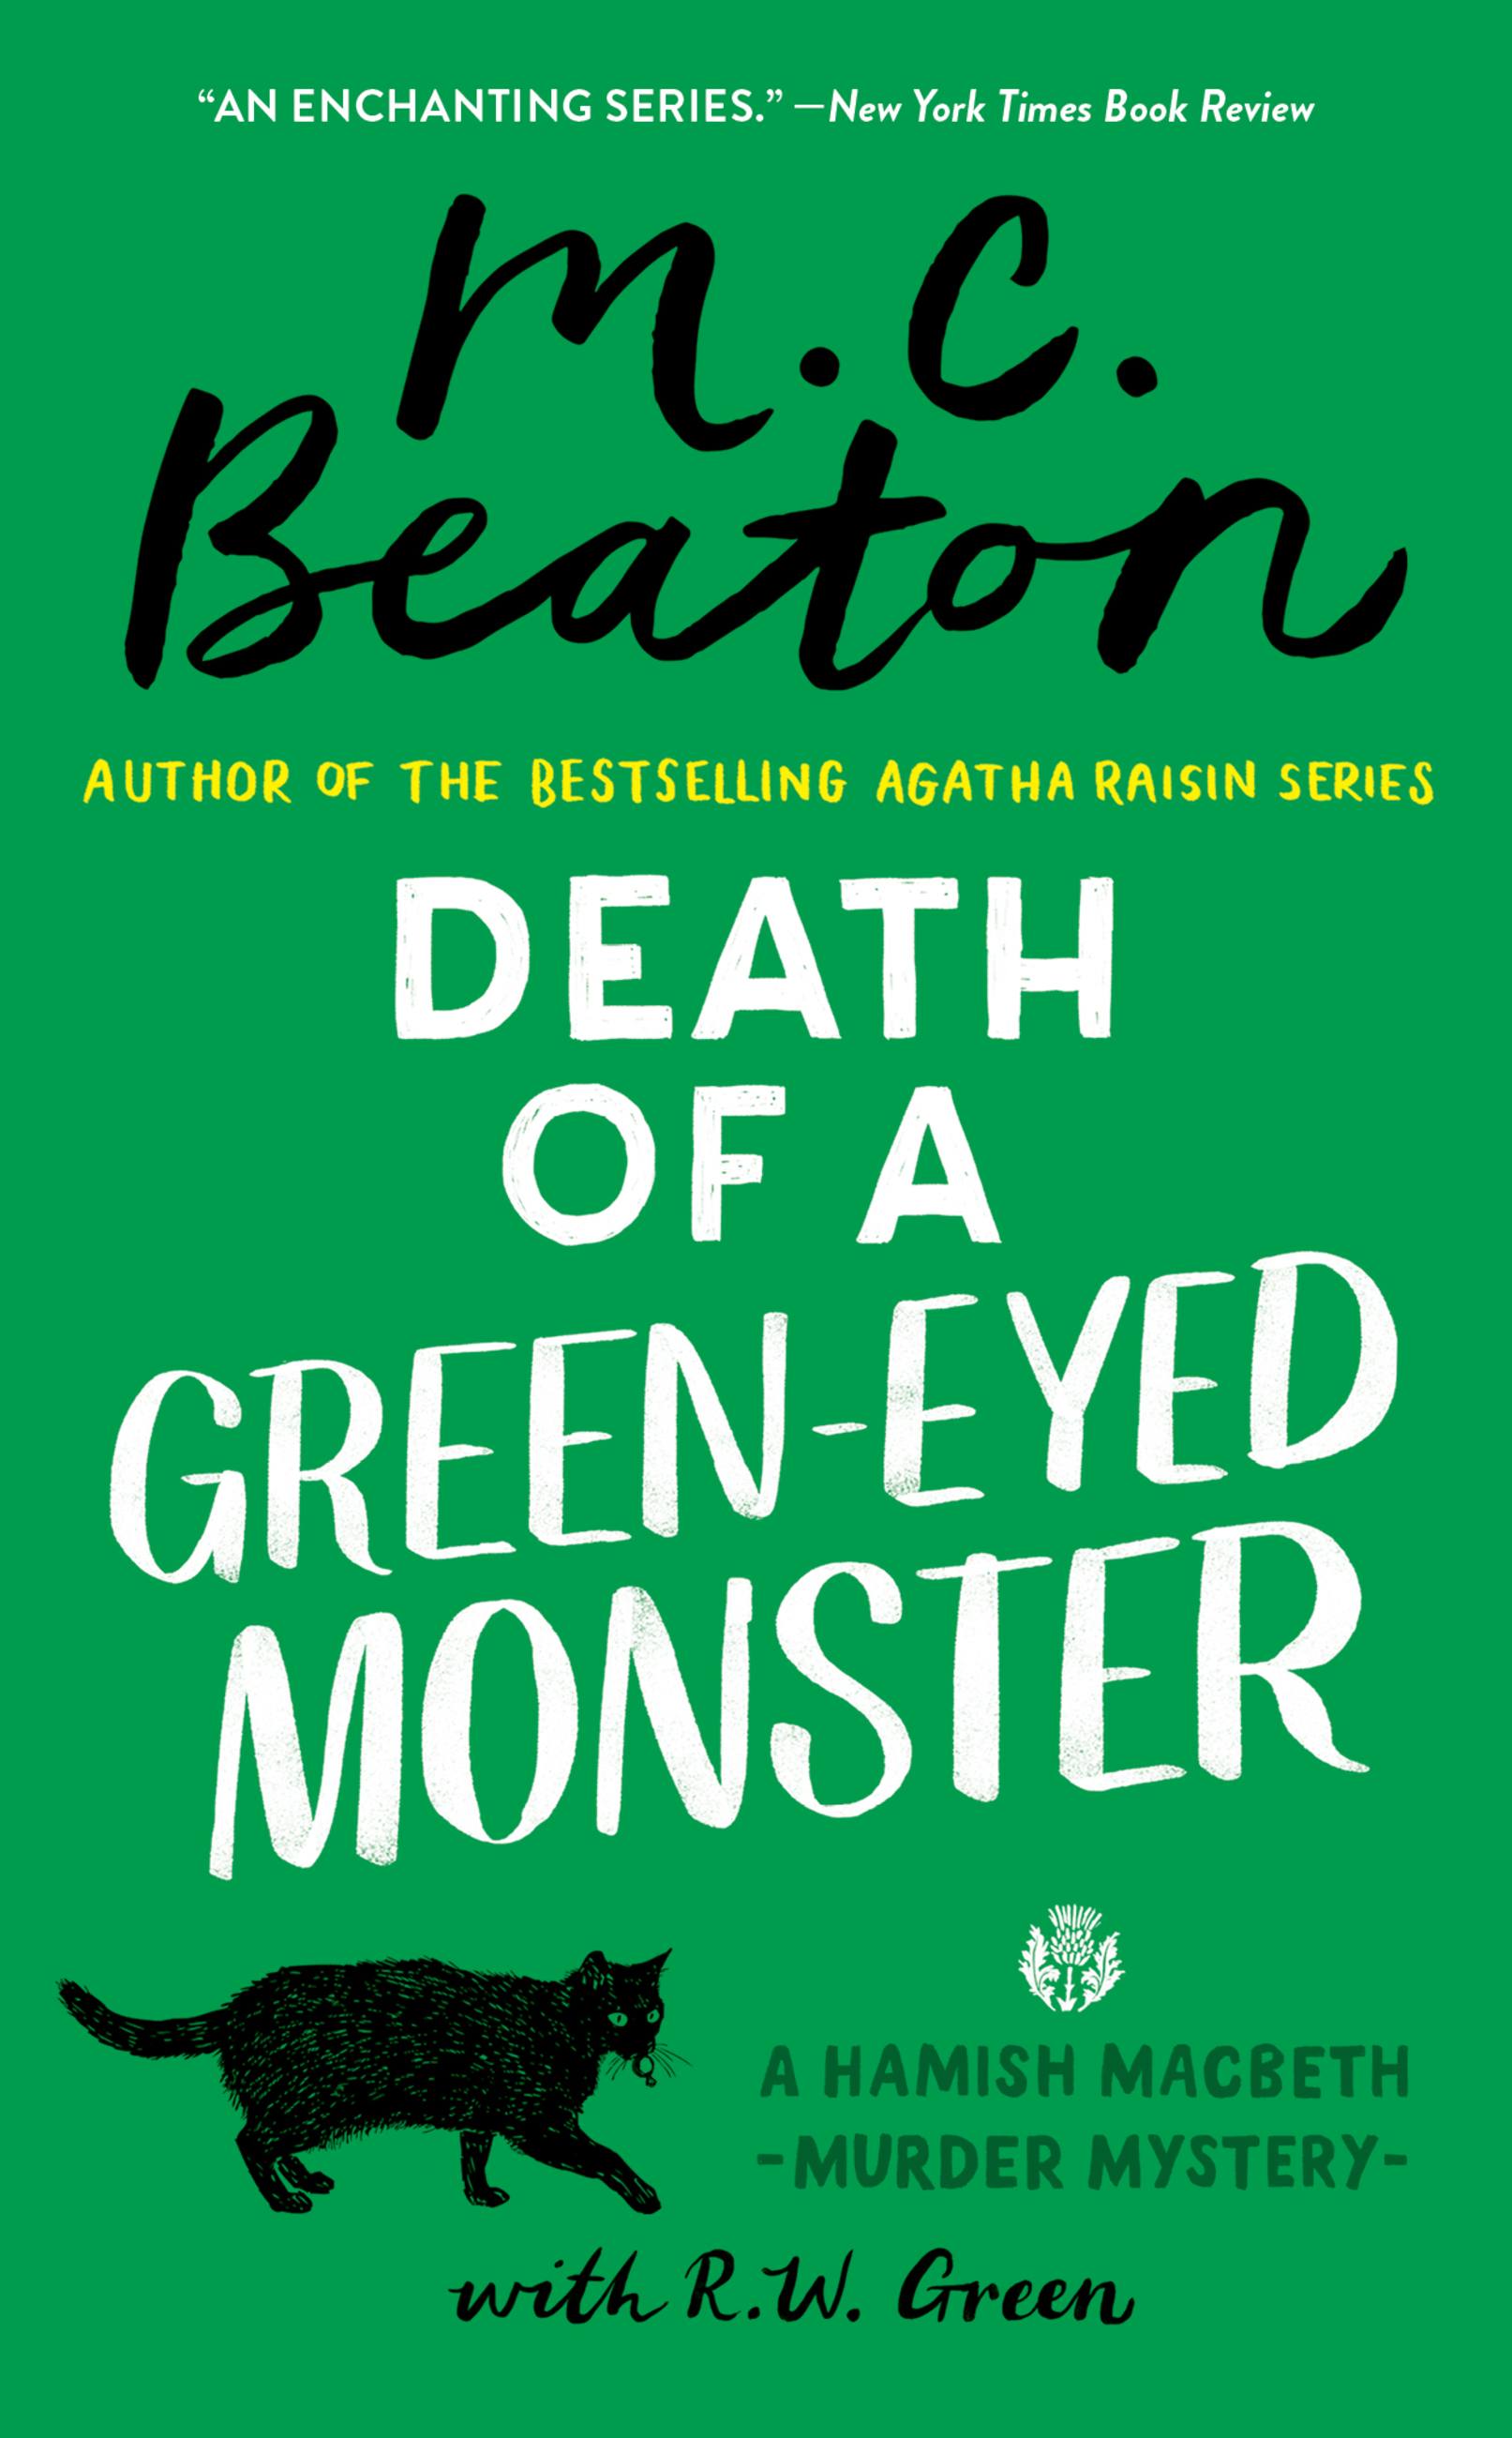 Death of a Green-Eyed Monster by M. C. Beaton | Grand Central Publishing